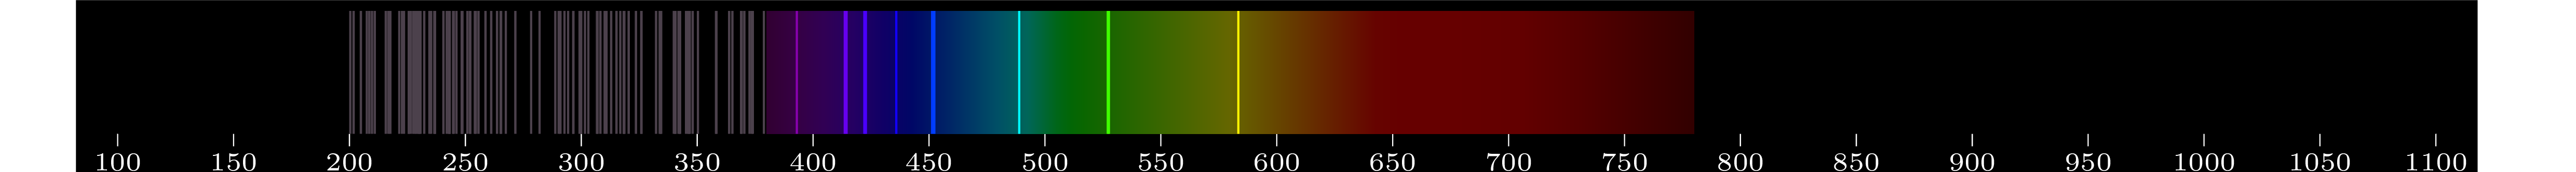 emmision spectra of element Re